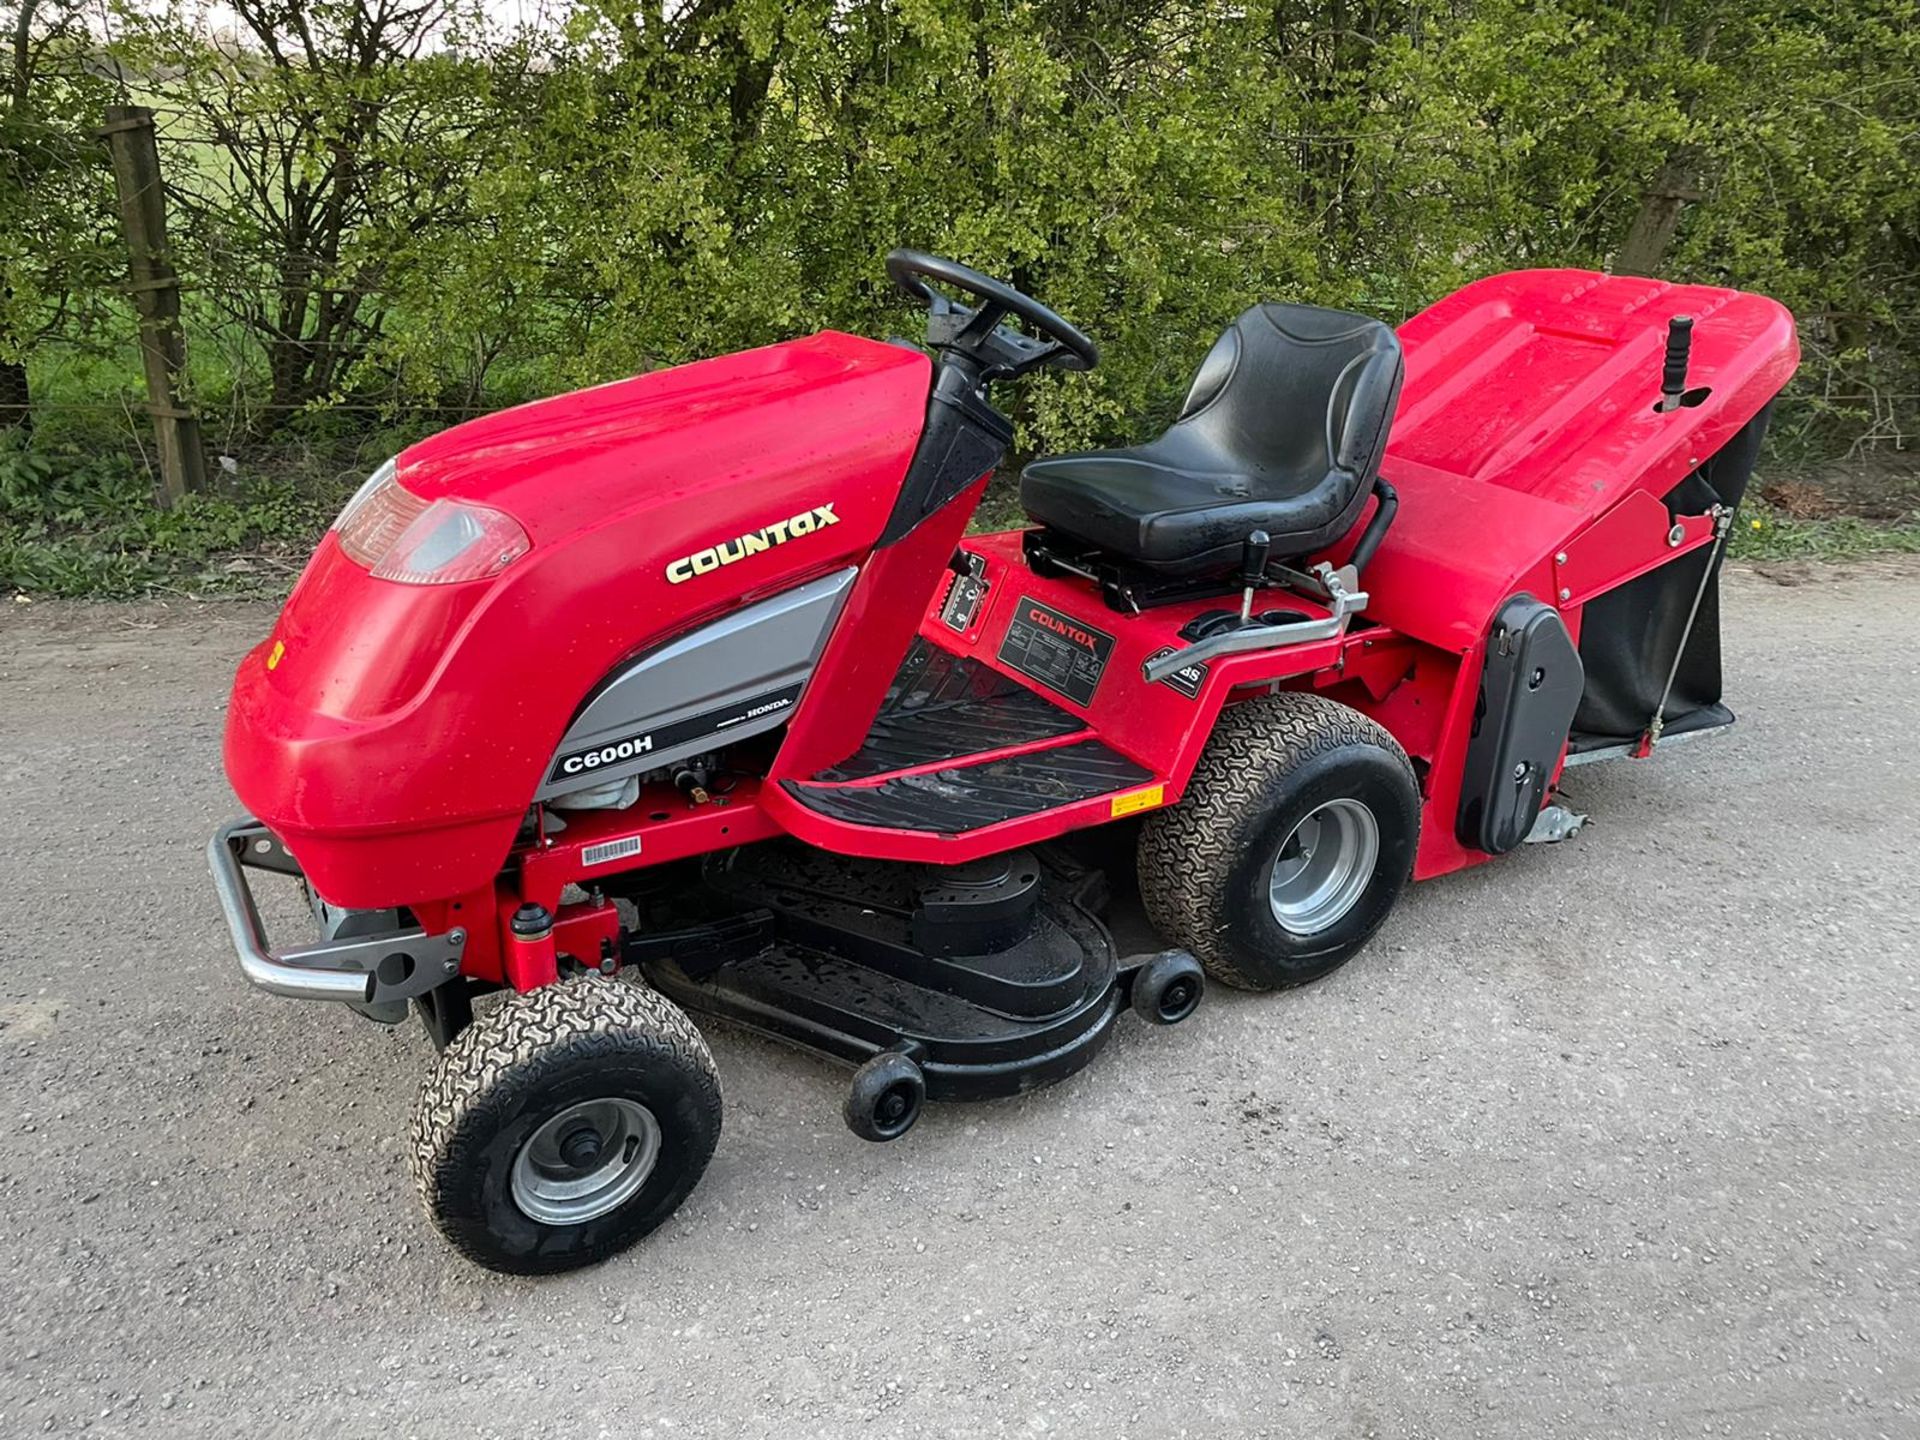 COUNTAX C600H RIDE ON MOWER WITH SCARIFIER, RUNS DRIVES AND CUTS, SWEEPER WORKS *NO VAT*